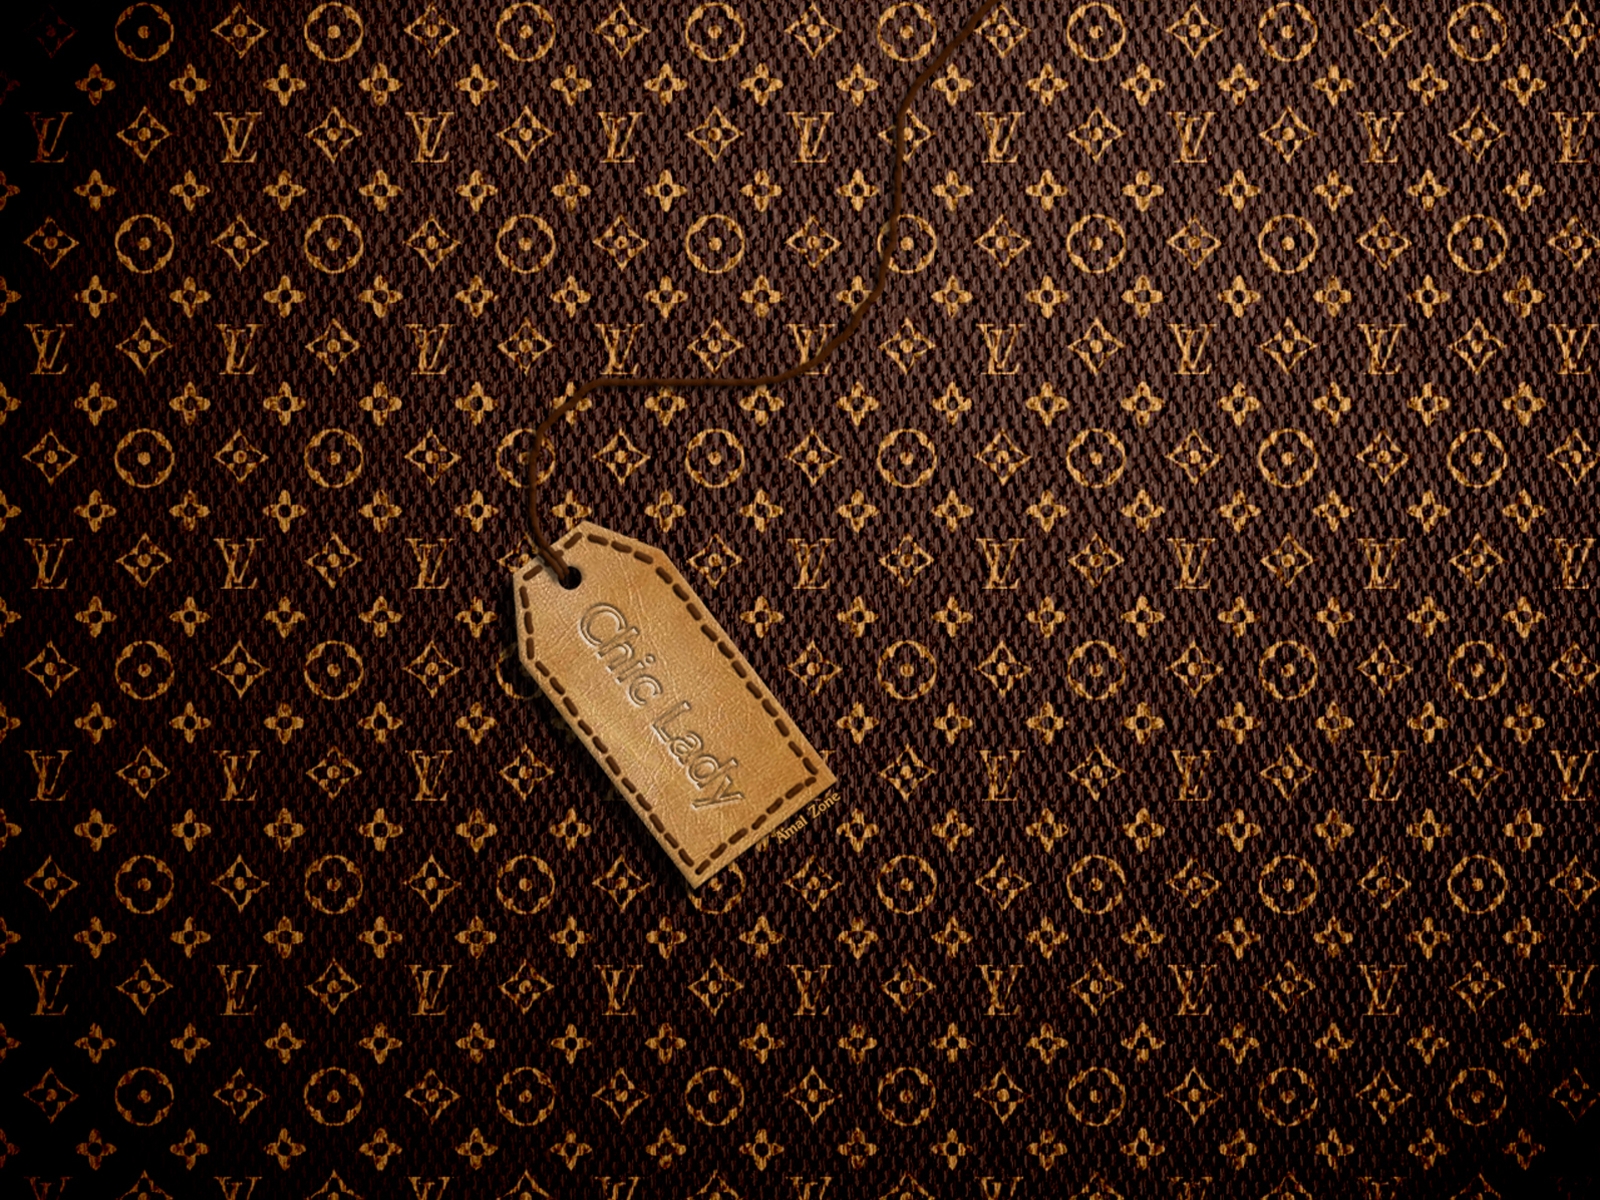 LV Pink Aesthetic Wallpapers - Wallpaper Cave